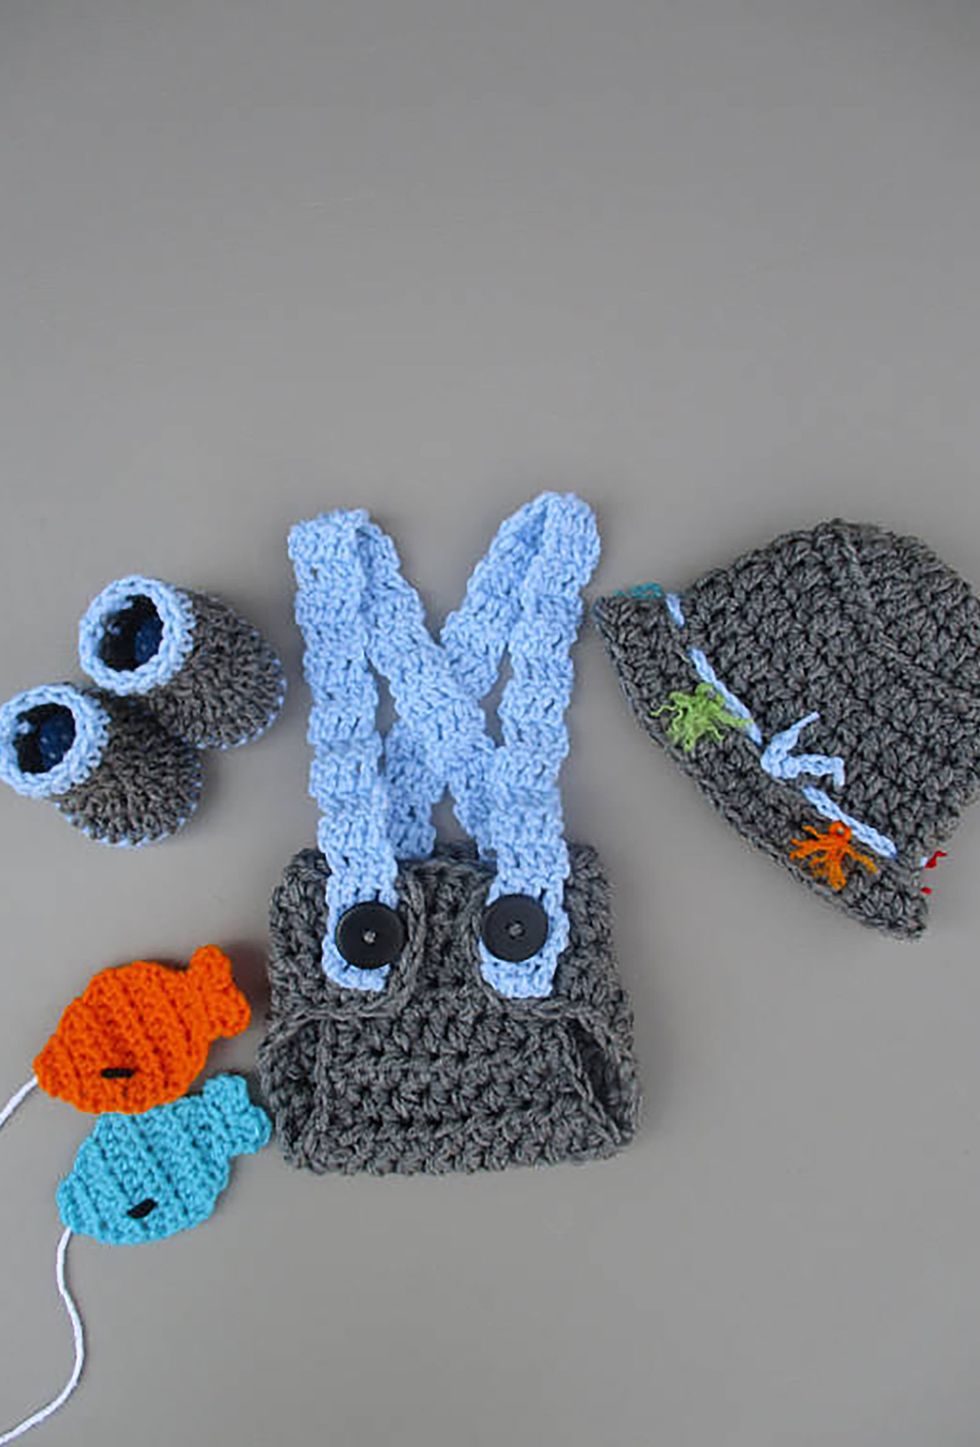 13 Crocheted Baby Halloween Costumes - Cutest Crocheted and Knitted Halloween  Costumes for Newborns